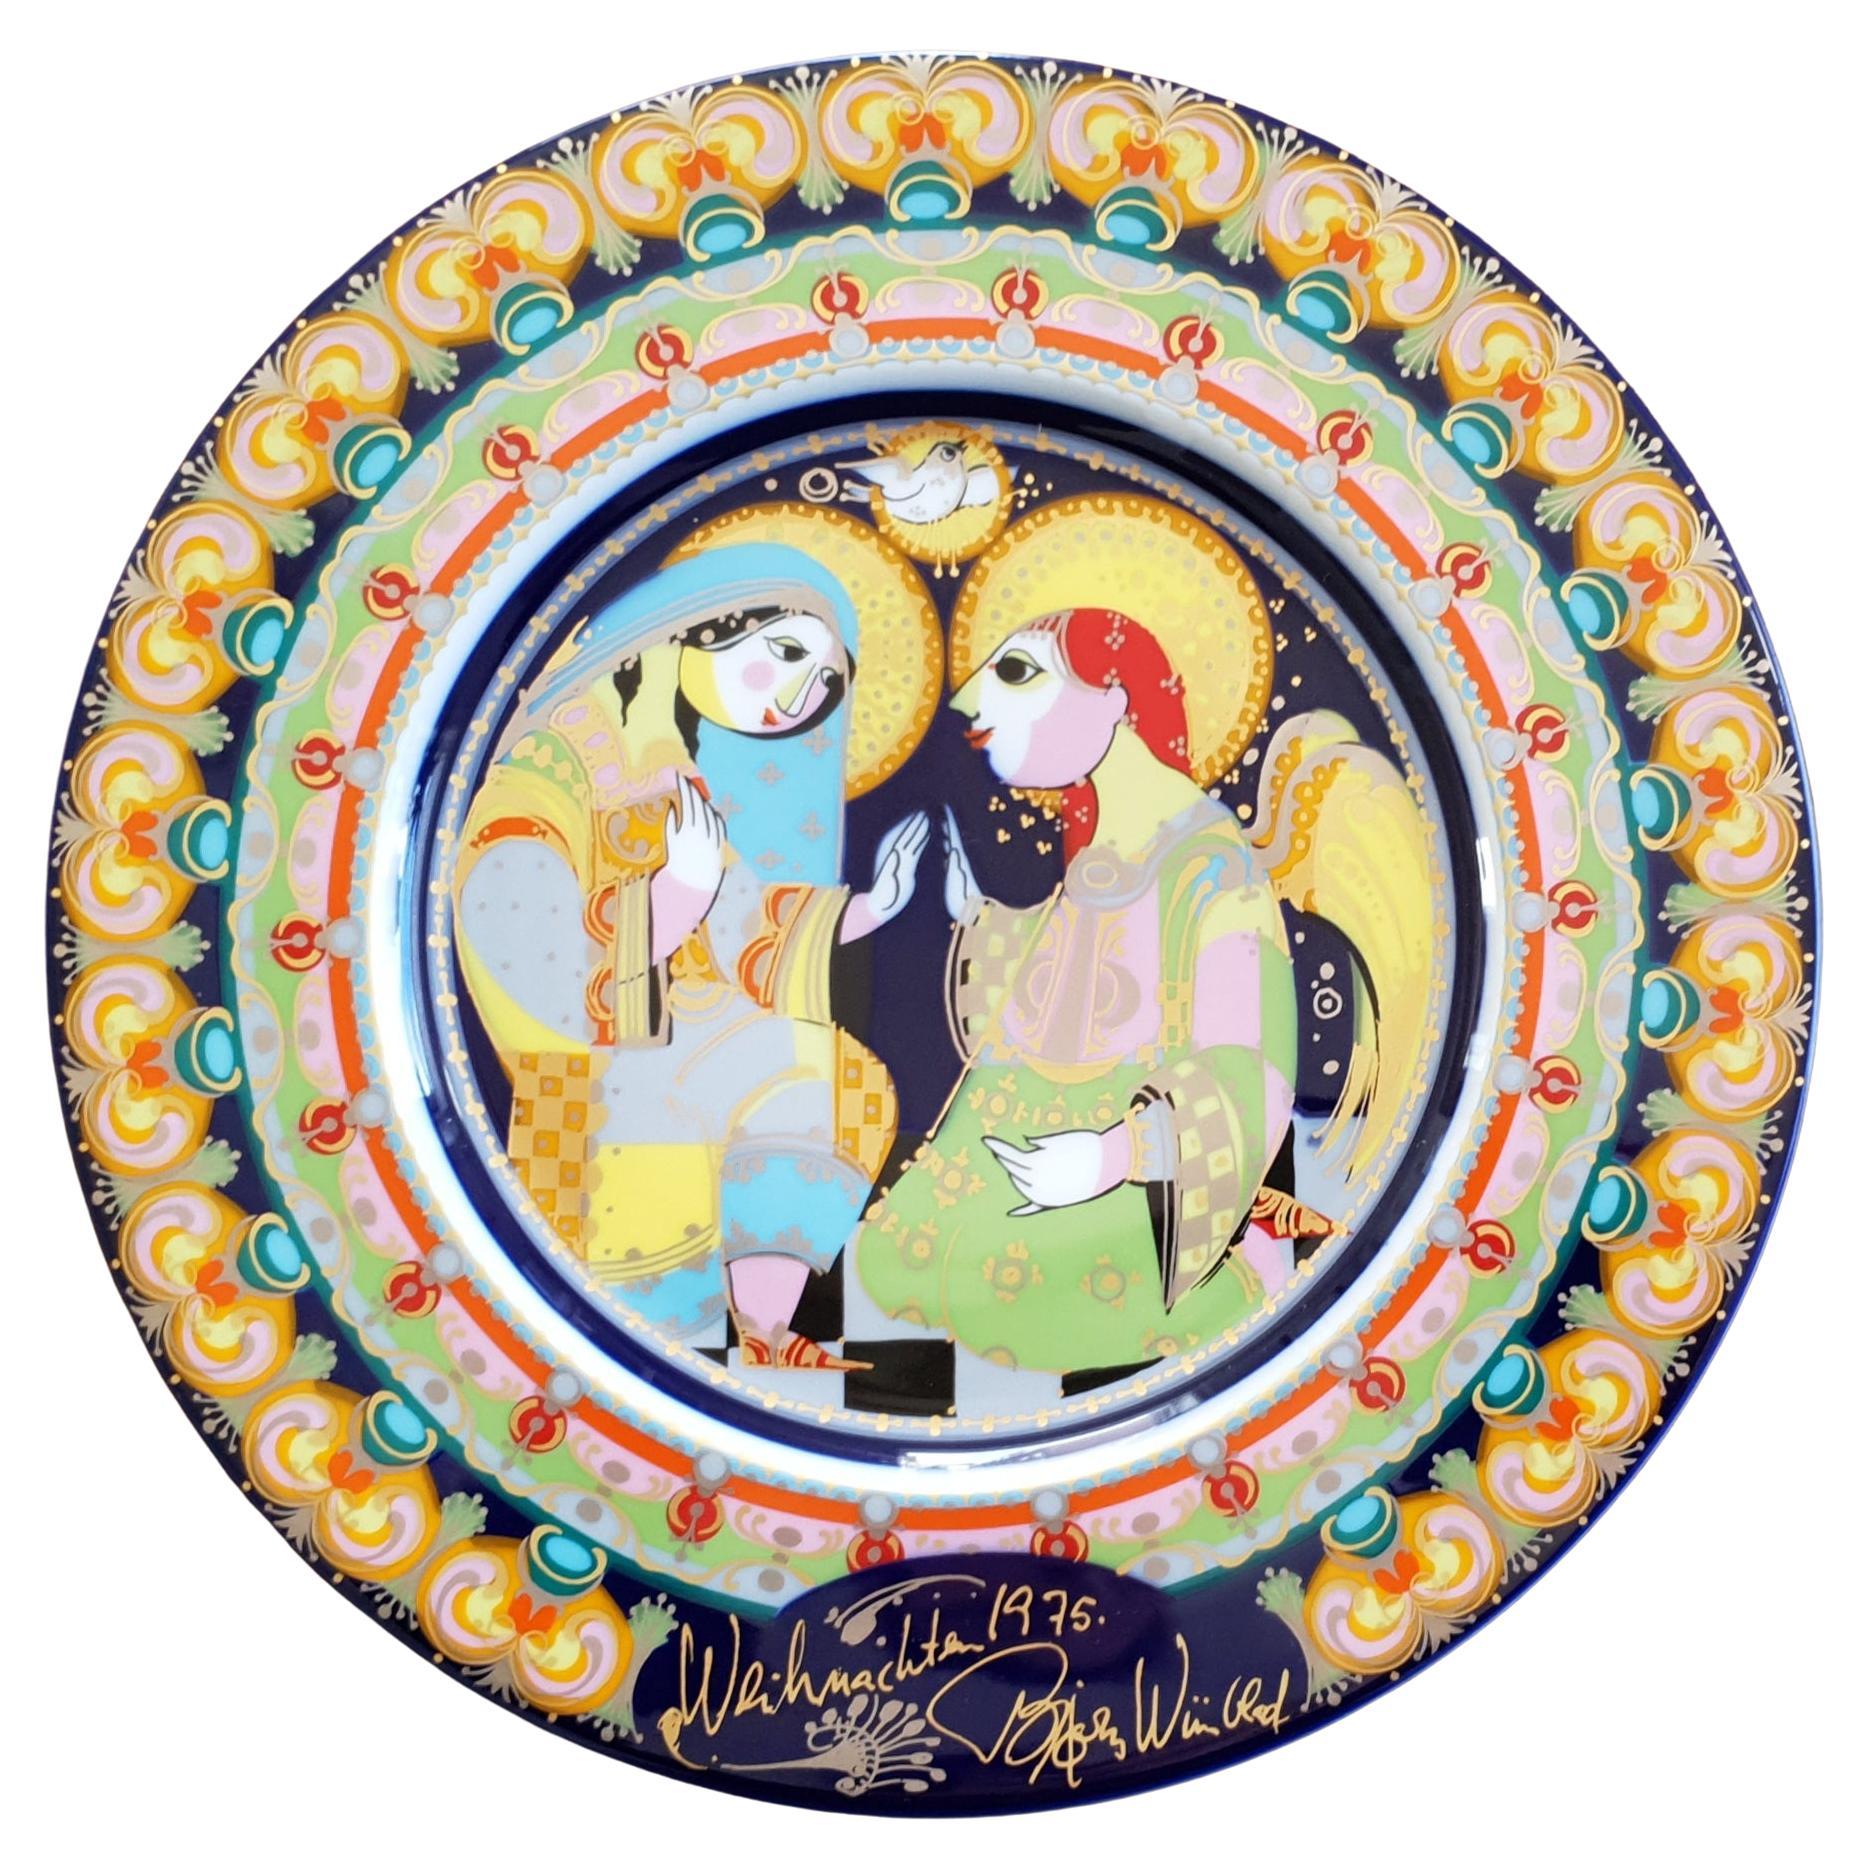 Bjørn Wiinblad Christmas Plate 1975 "Annunciation to the Blessed Virgin Mary" For Sale